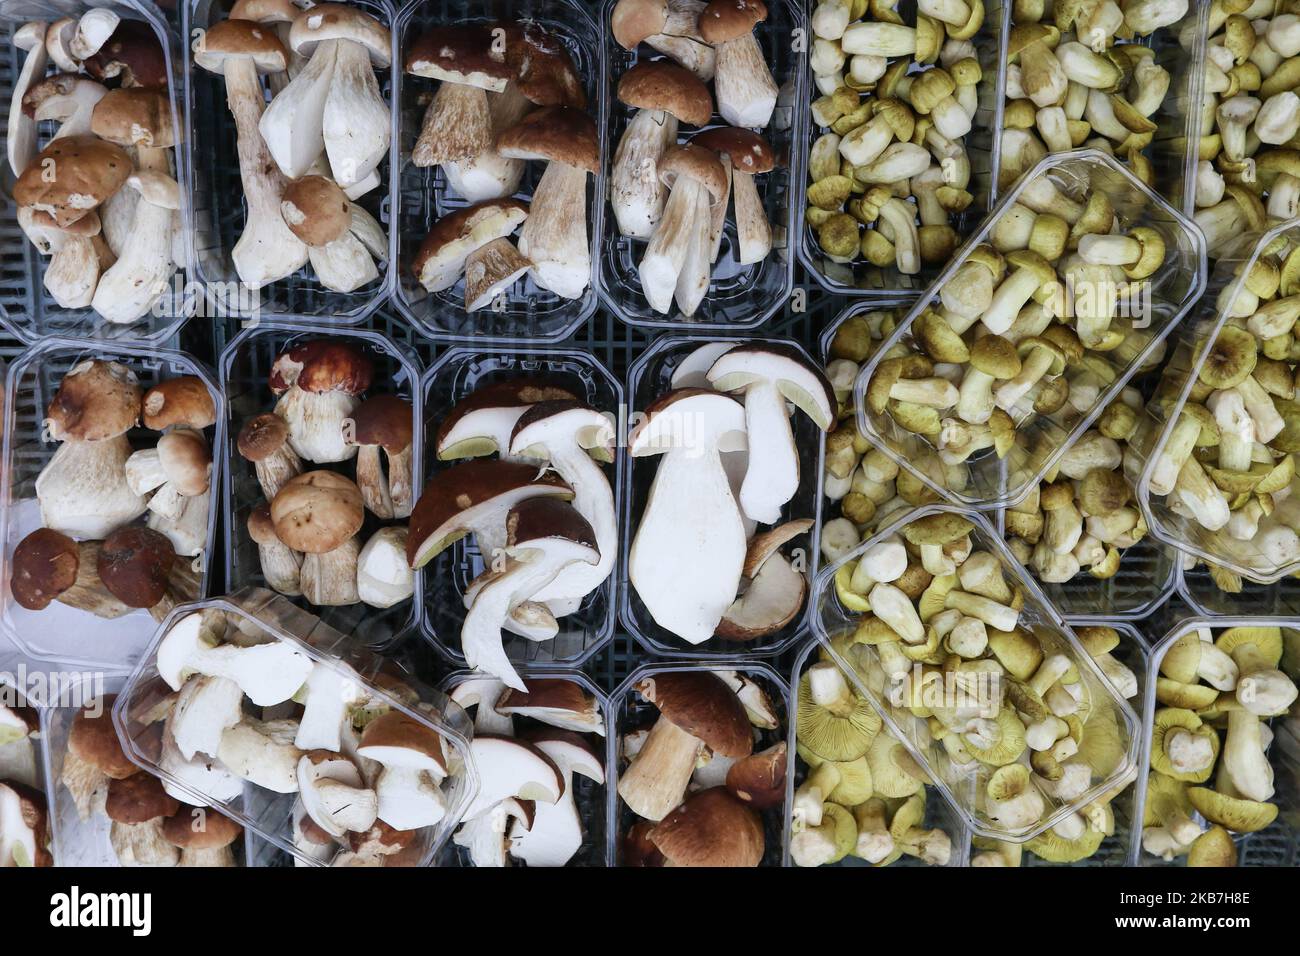 Mushrooms seller with penny buns (Boletus edulis), parasol mushrooms (Macrolepiota procera) and Tricholoma equestre (man on horseback or yellow knight) is seen on Green Market in Sopot, Poland on 4 October 2019 In recent days, Polish forests have been swarming with mushroom pickers. The favorable weather caused favorable conditions for the growth of a large number of edible mushrooms (Photo by Michal Fludra/NurPhoto) Stock Photo